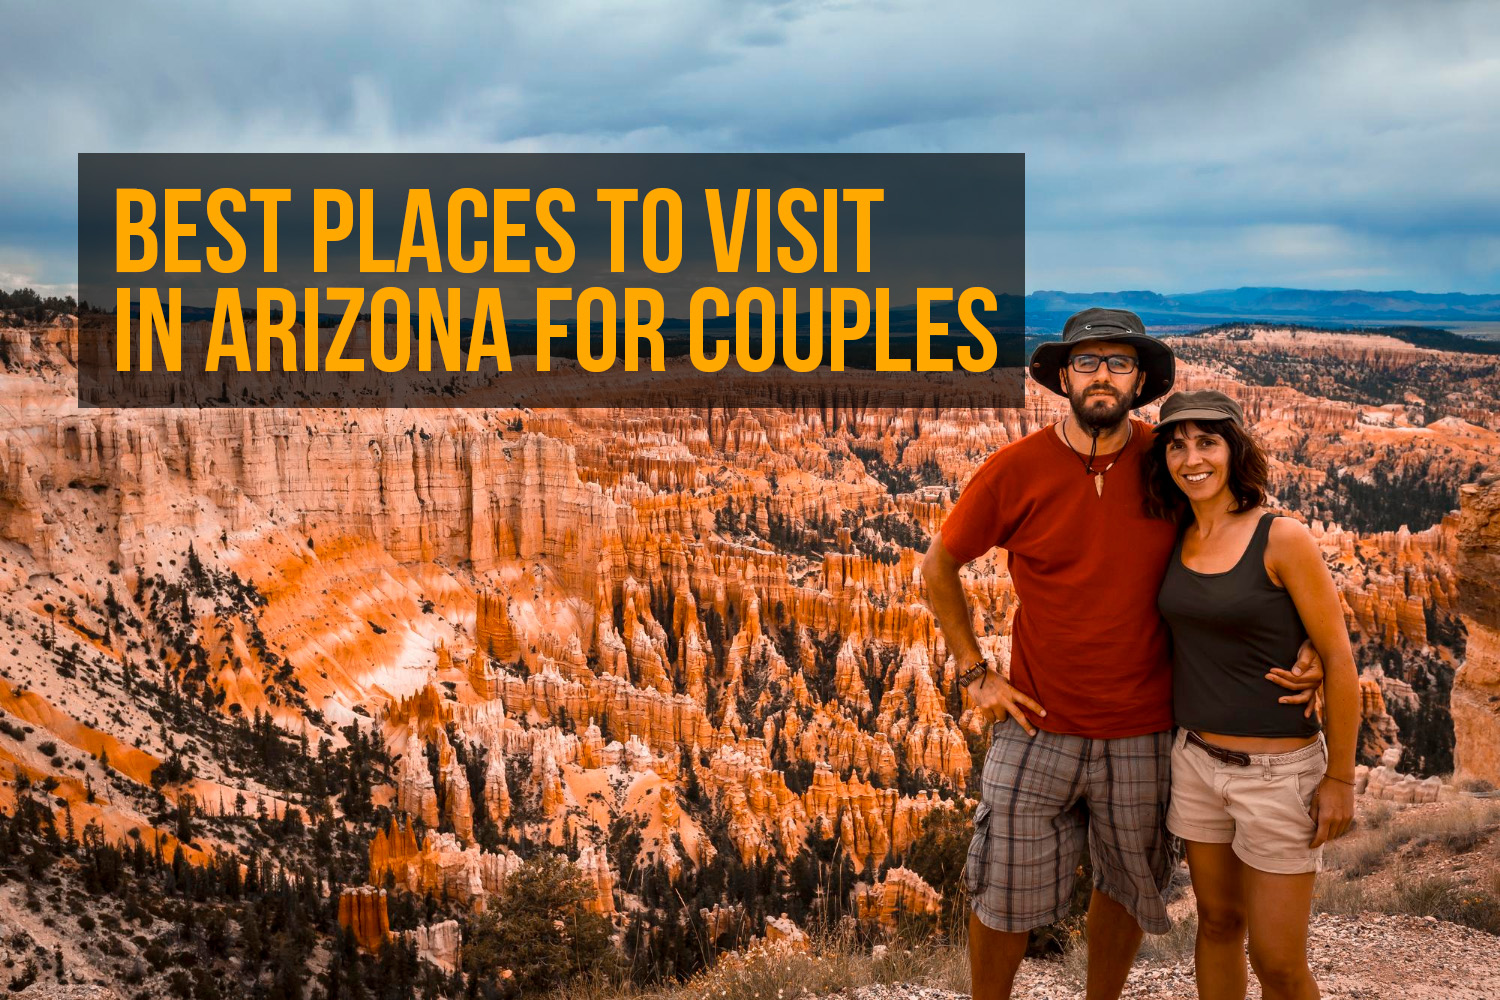 Best Places to Visit in Arizona for Couples